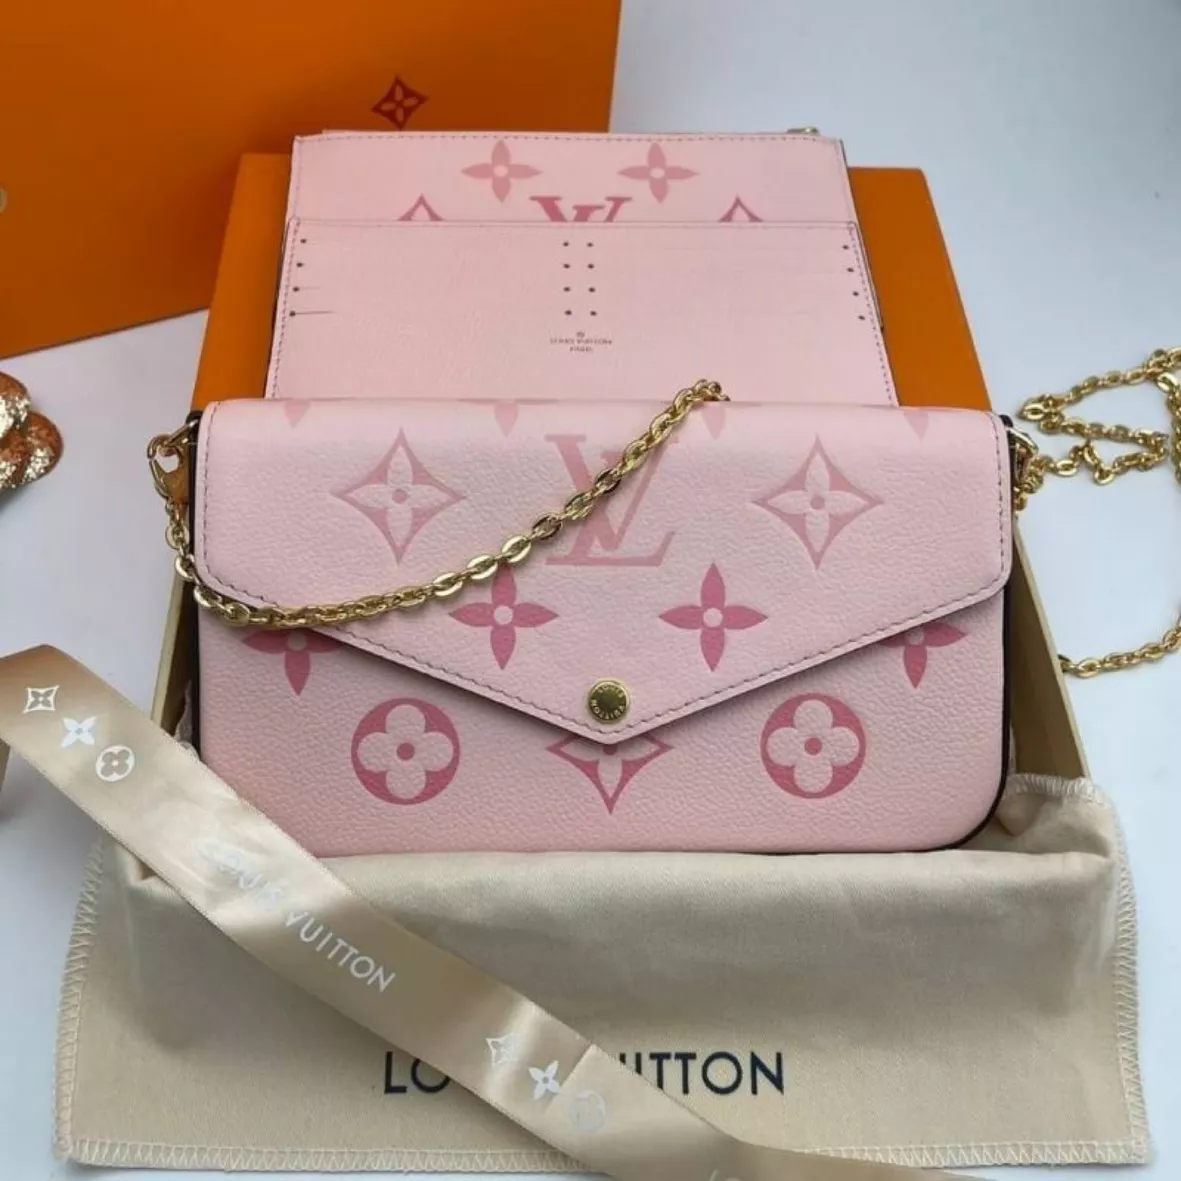 4th Dhgate Unboxing Review: Pochette Felicie in Monogram 